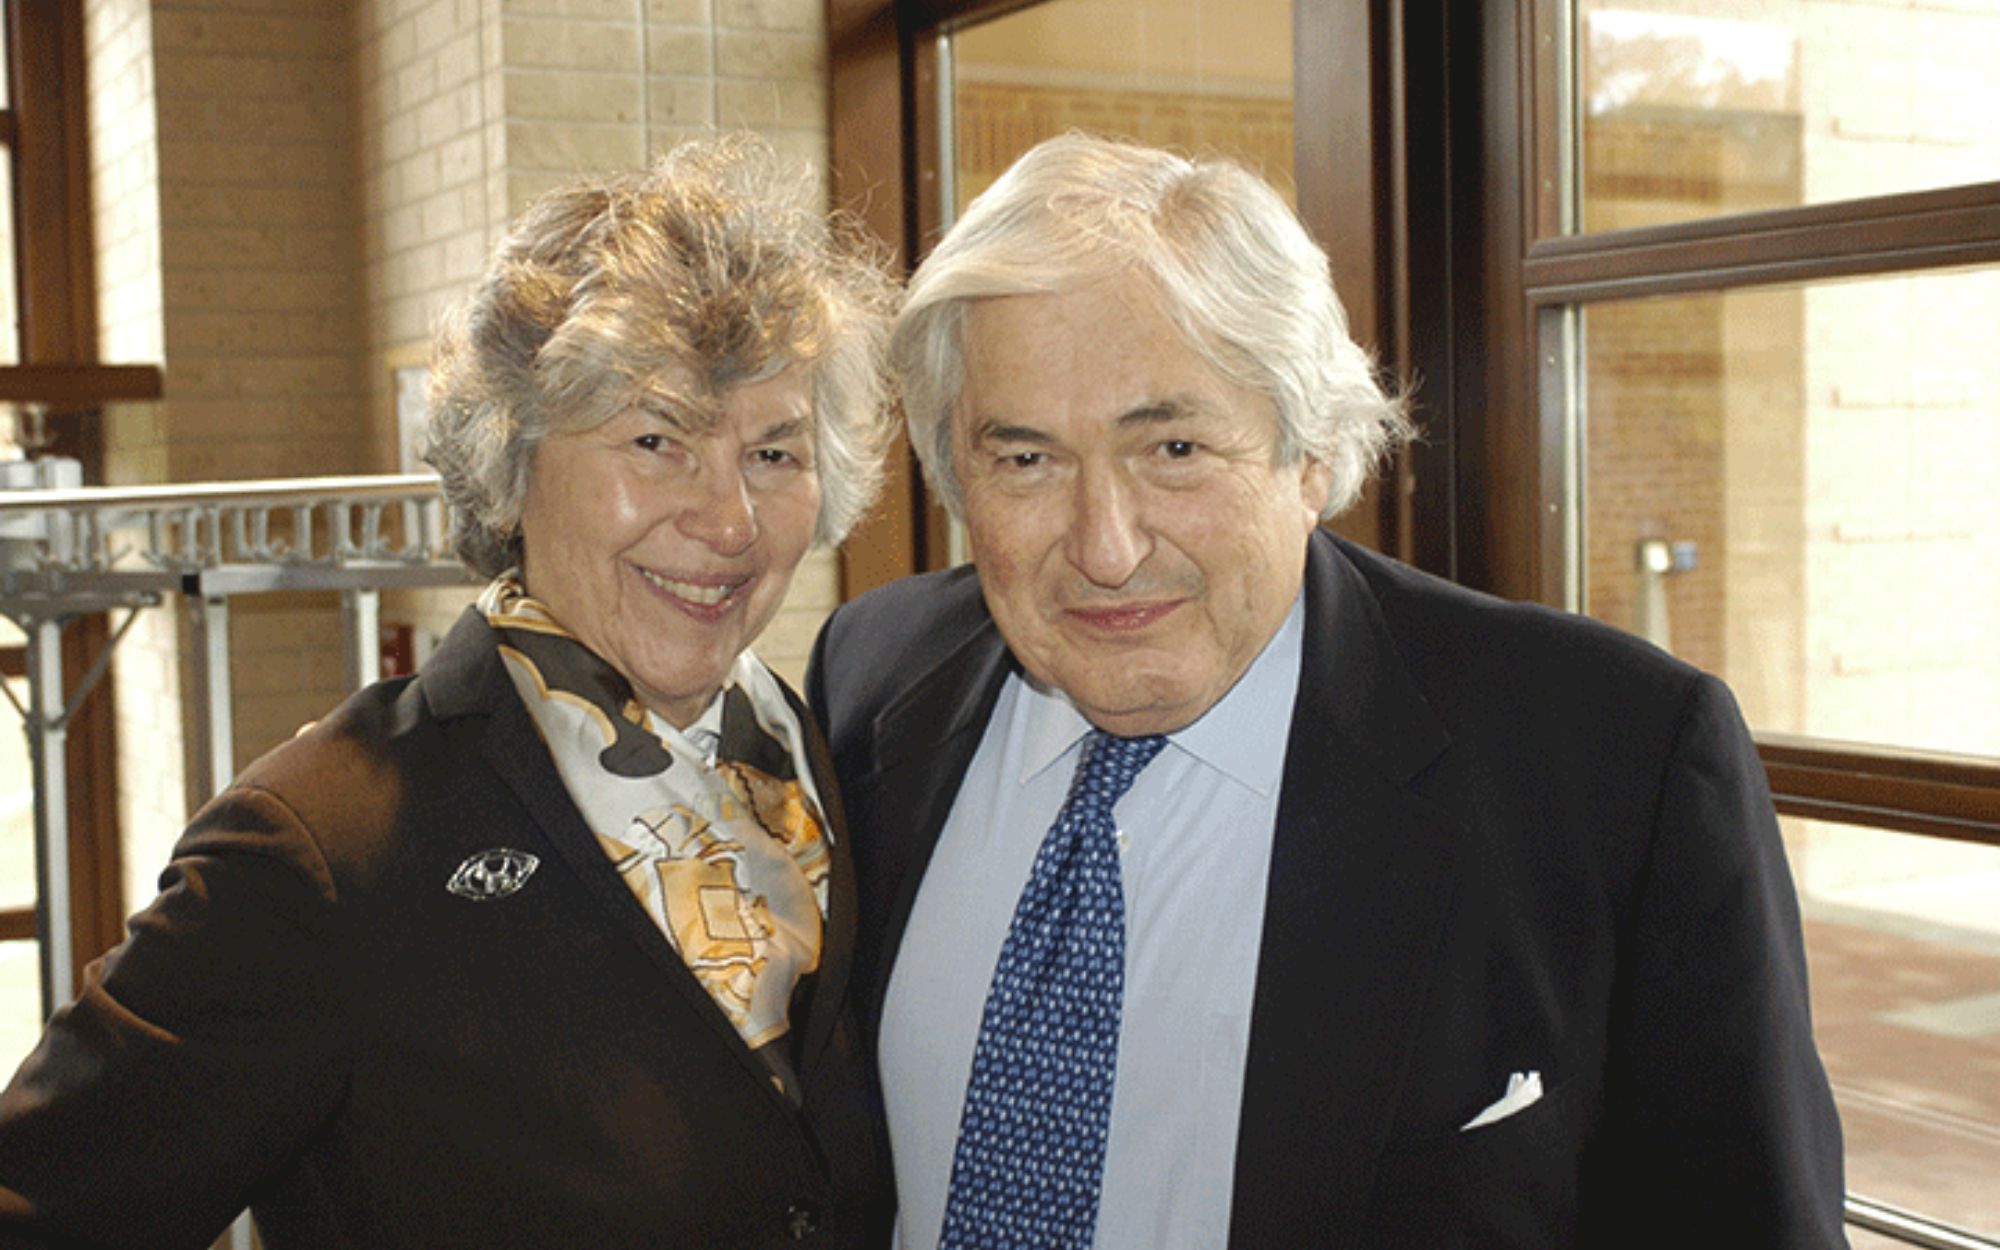 The Estate of Elaine and James D. Wolfensohn